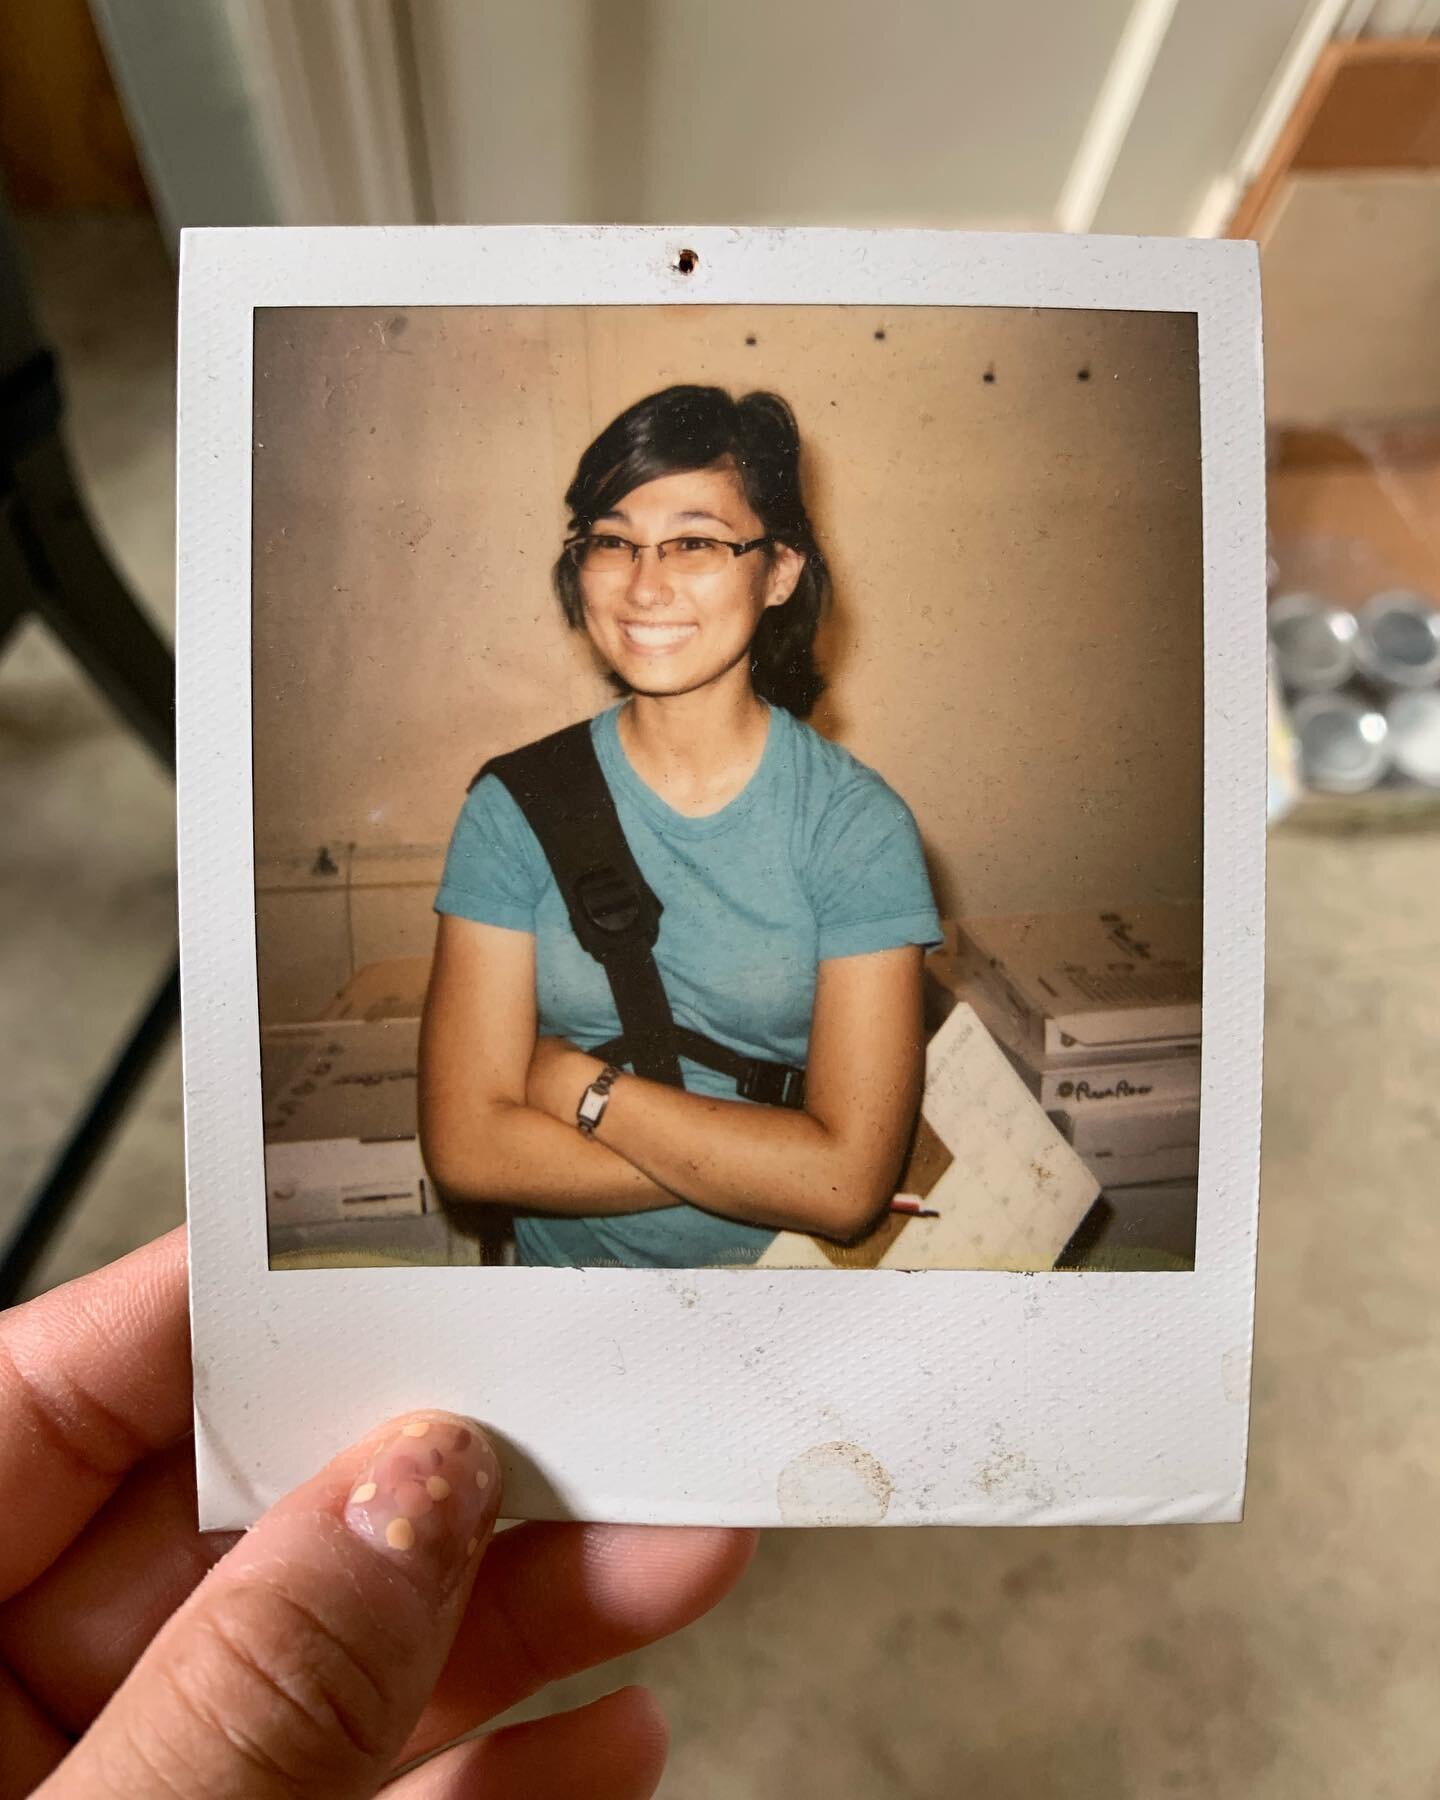 Polaroid from 2007 on my first day in the Printmaking Department at RISD and my new ID card for this year! Excited to be joining Printmaking and Graphic Design this fall.